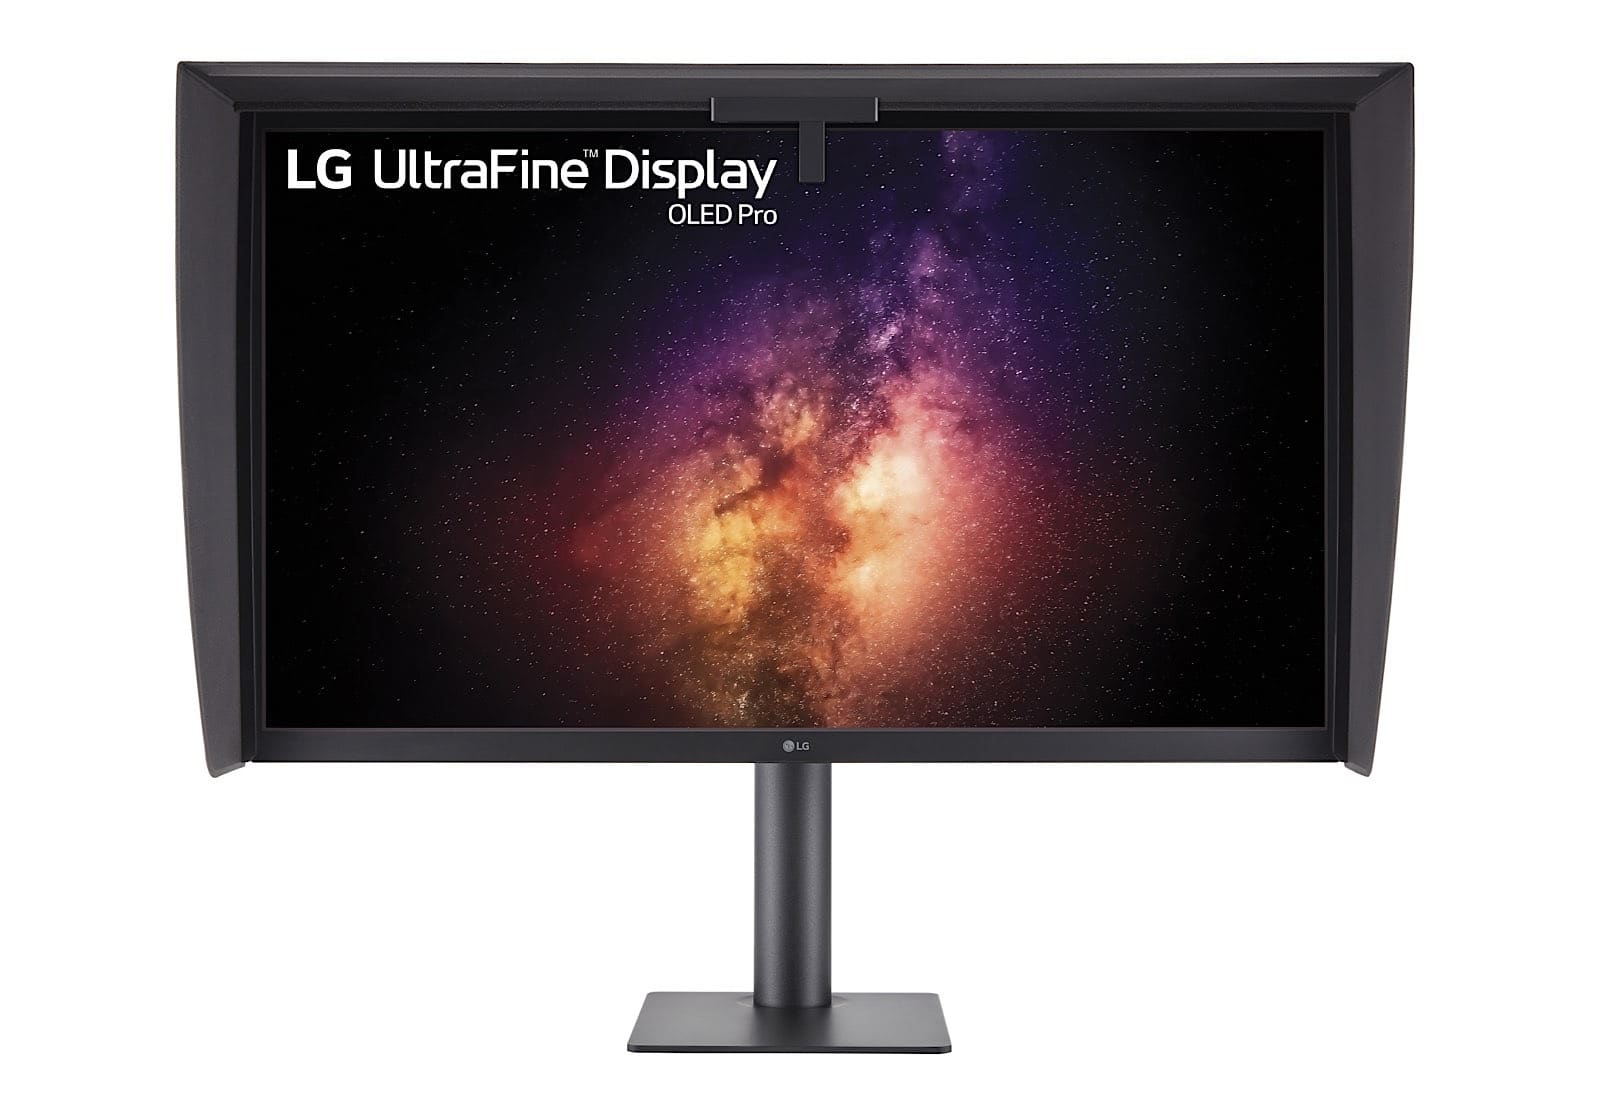 LG UltraFine OLED Pro screens launching at CES 2022